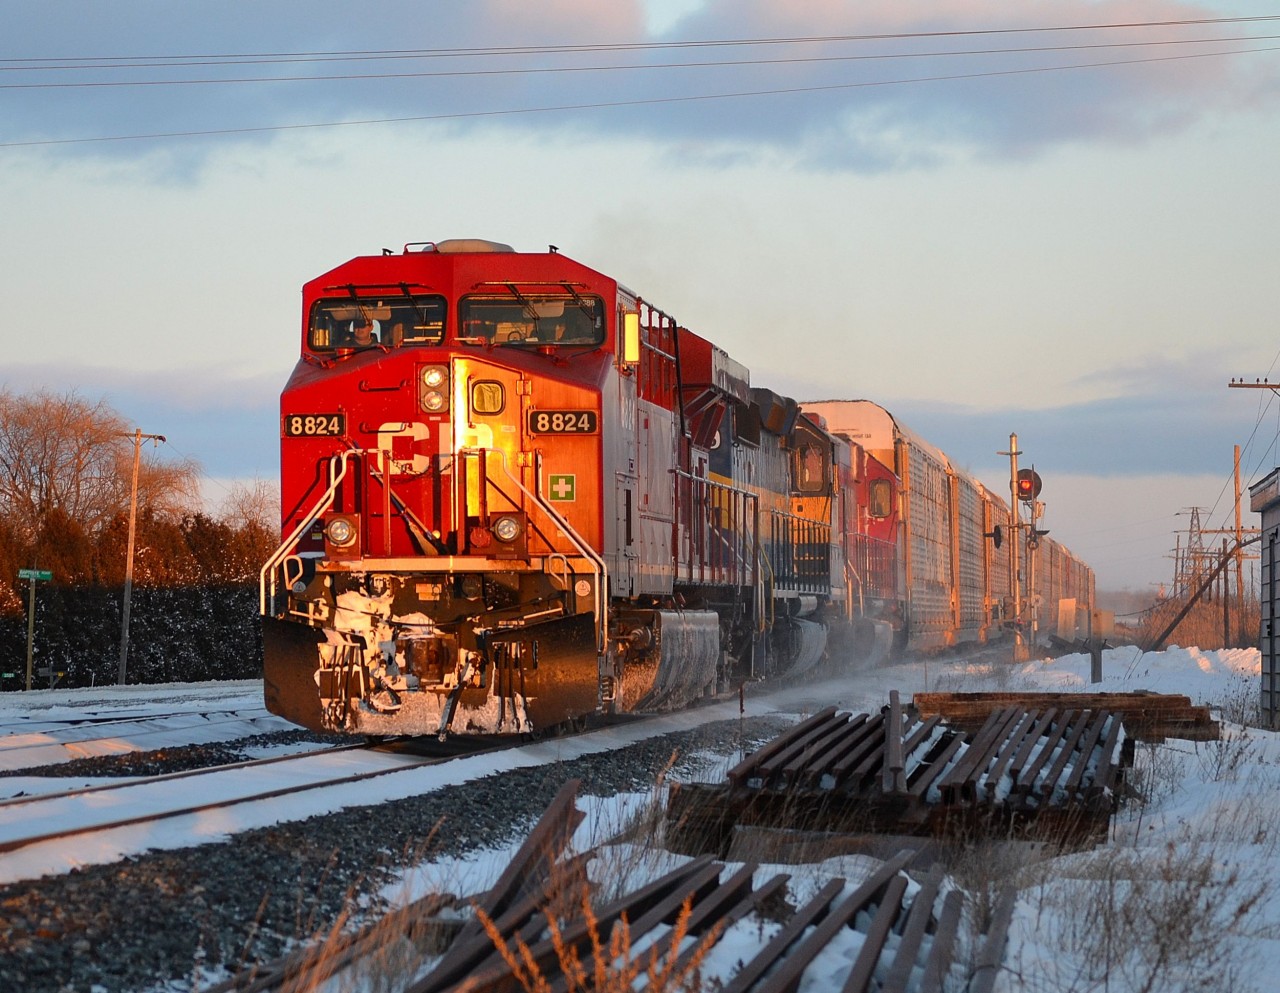 CP 147 west led by CP 8824, ICE 6433 and SOO 6049 passes the east siding switch in Tilbury with the lights dimmed as CP 440 was pulling up in the siding.